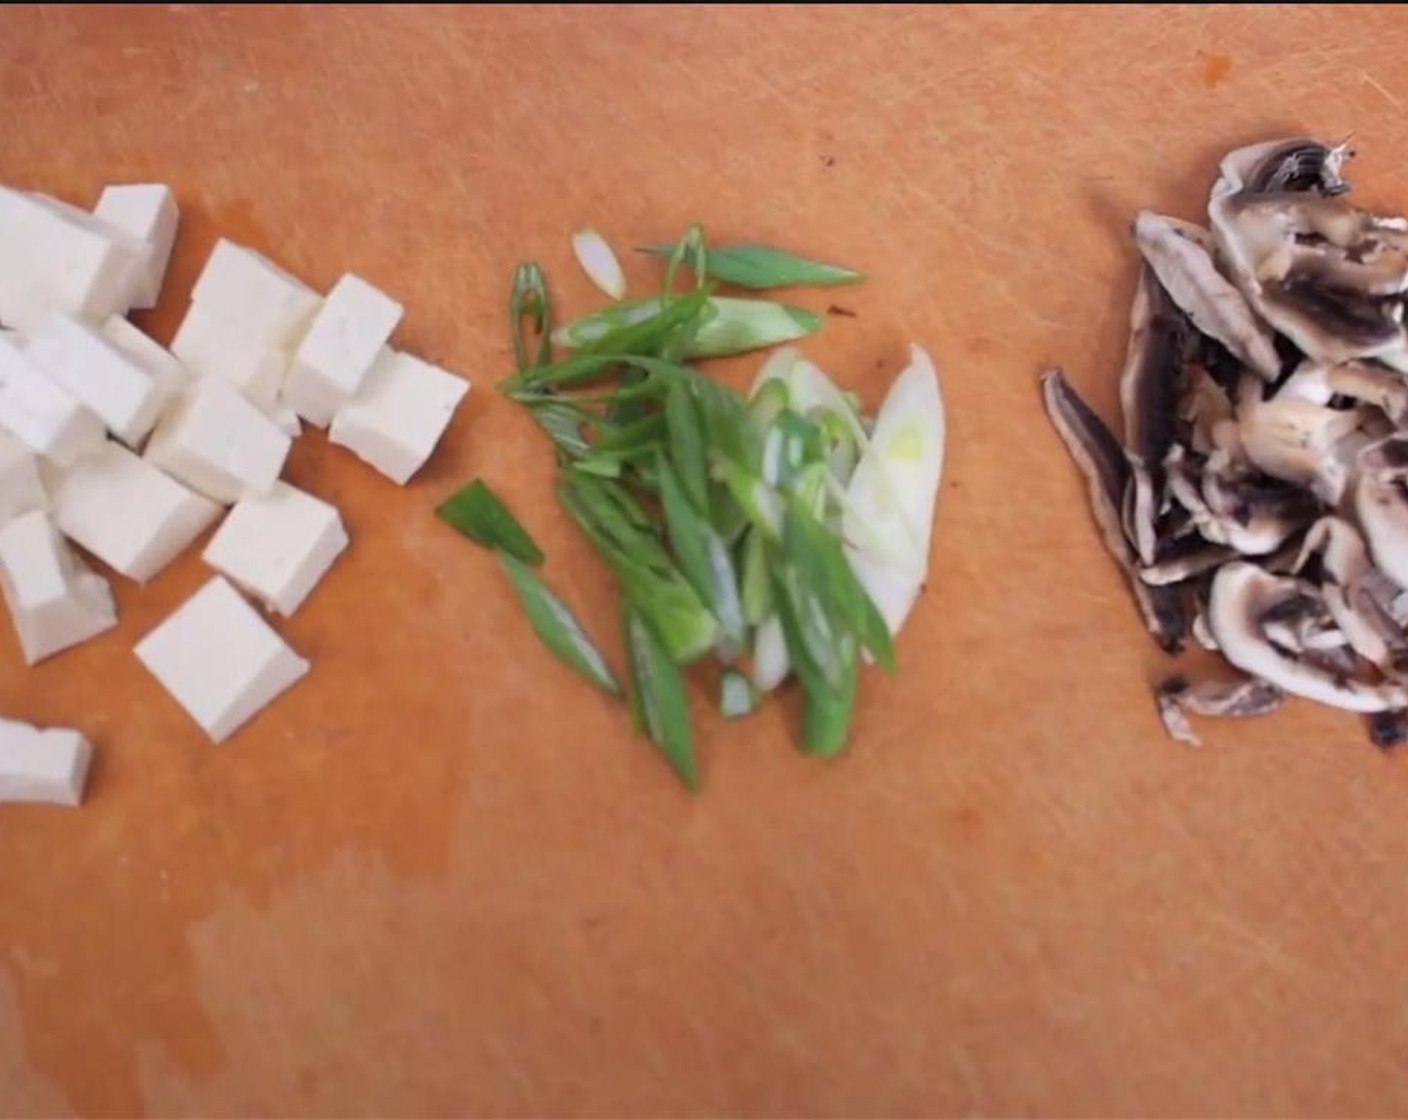 step 2 Meanwhile, cube the Tofu (1/4 cup). Slice the Button Mushroom (1) and chop the Scallion (1 stalk) on a diagonal.